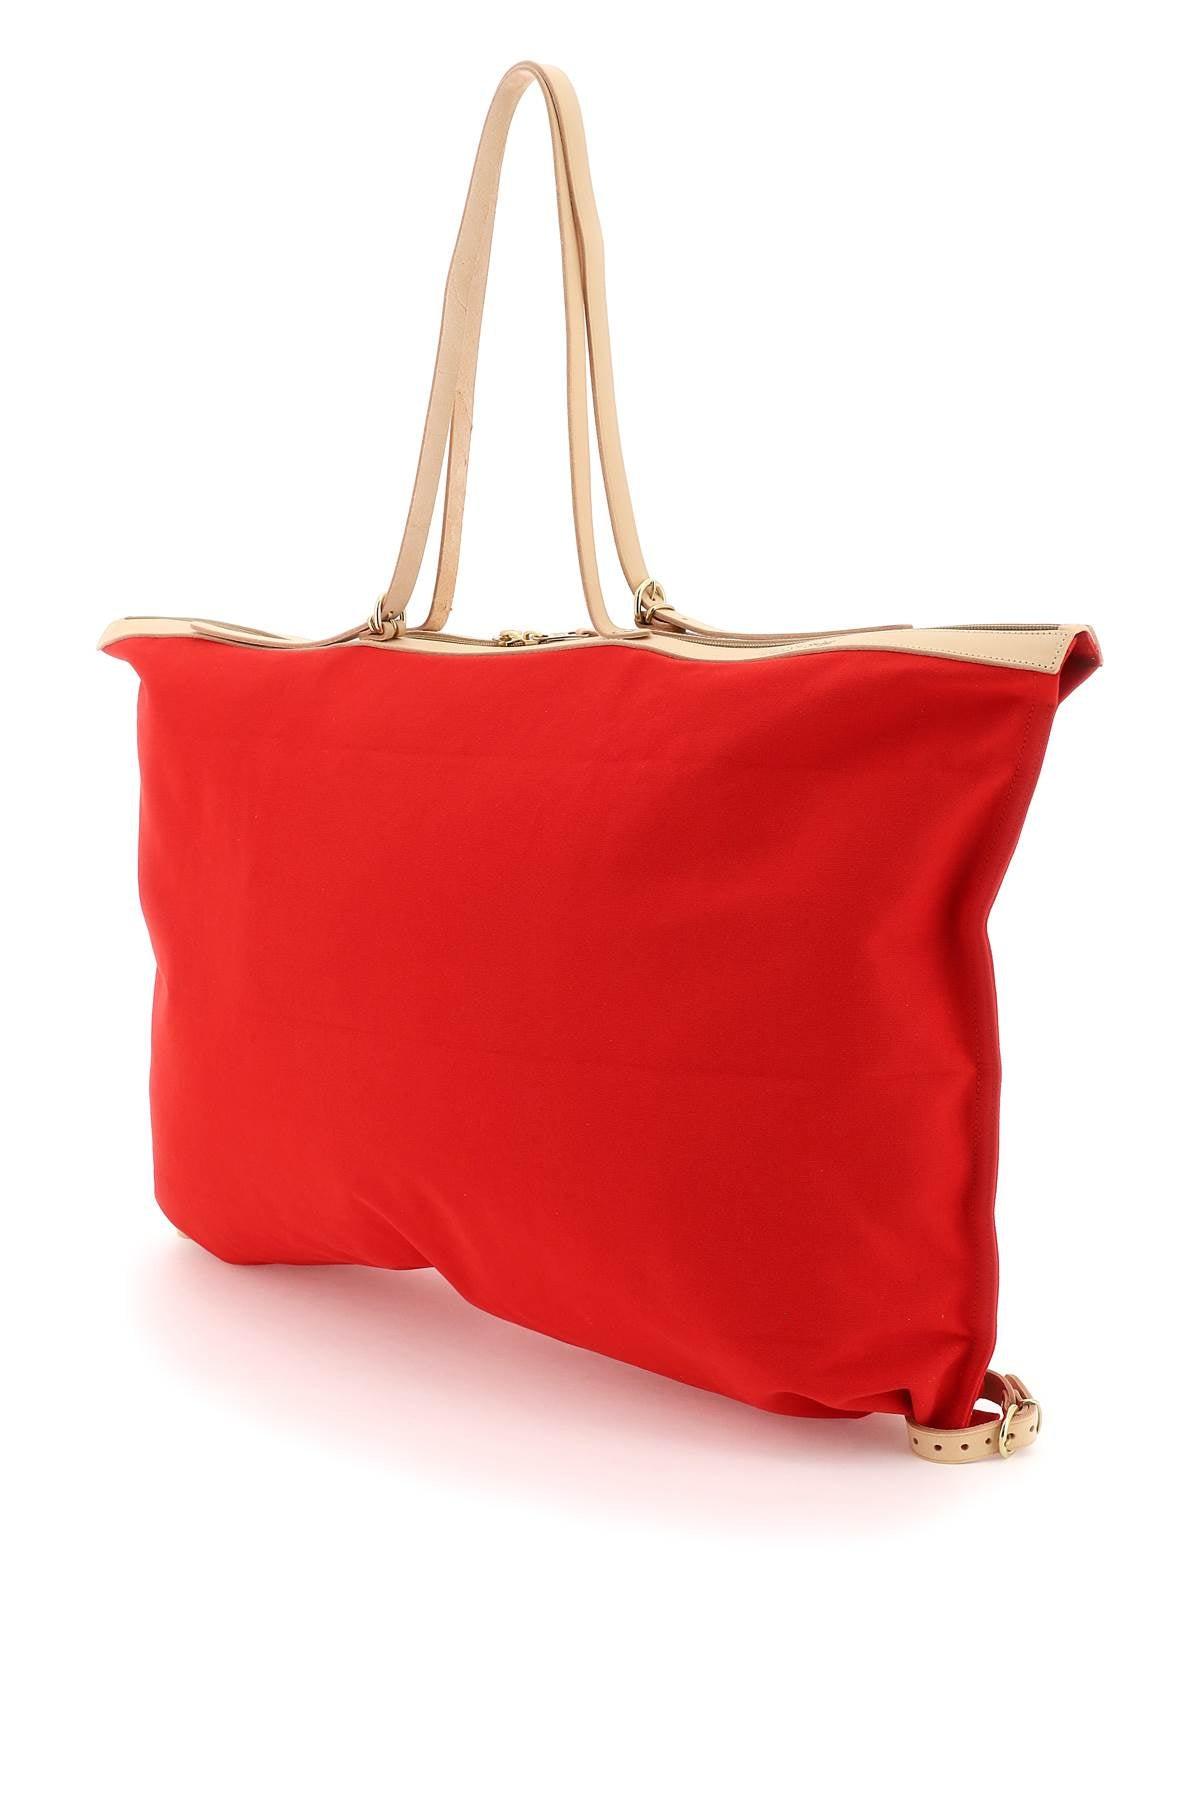 Il Bisonte Cotton Canvas Maxi Tote Bag in Red | Lyst